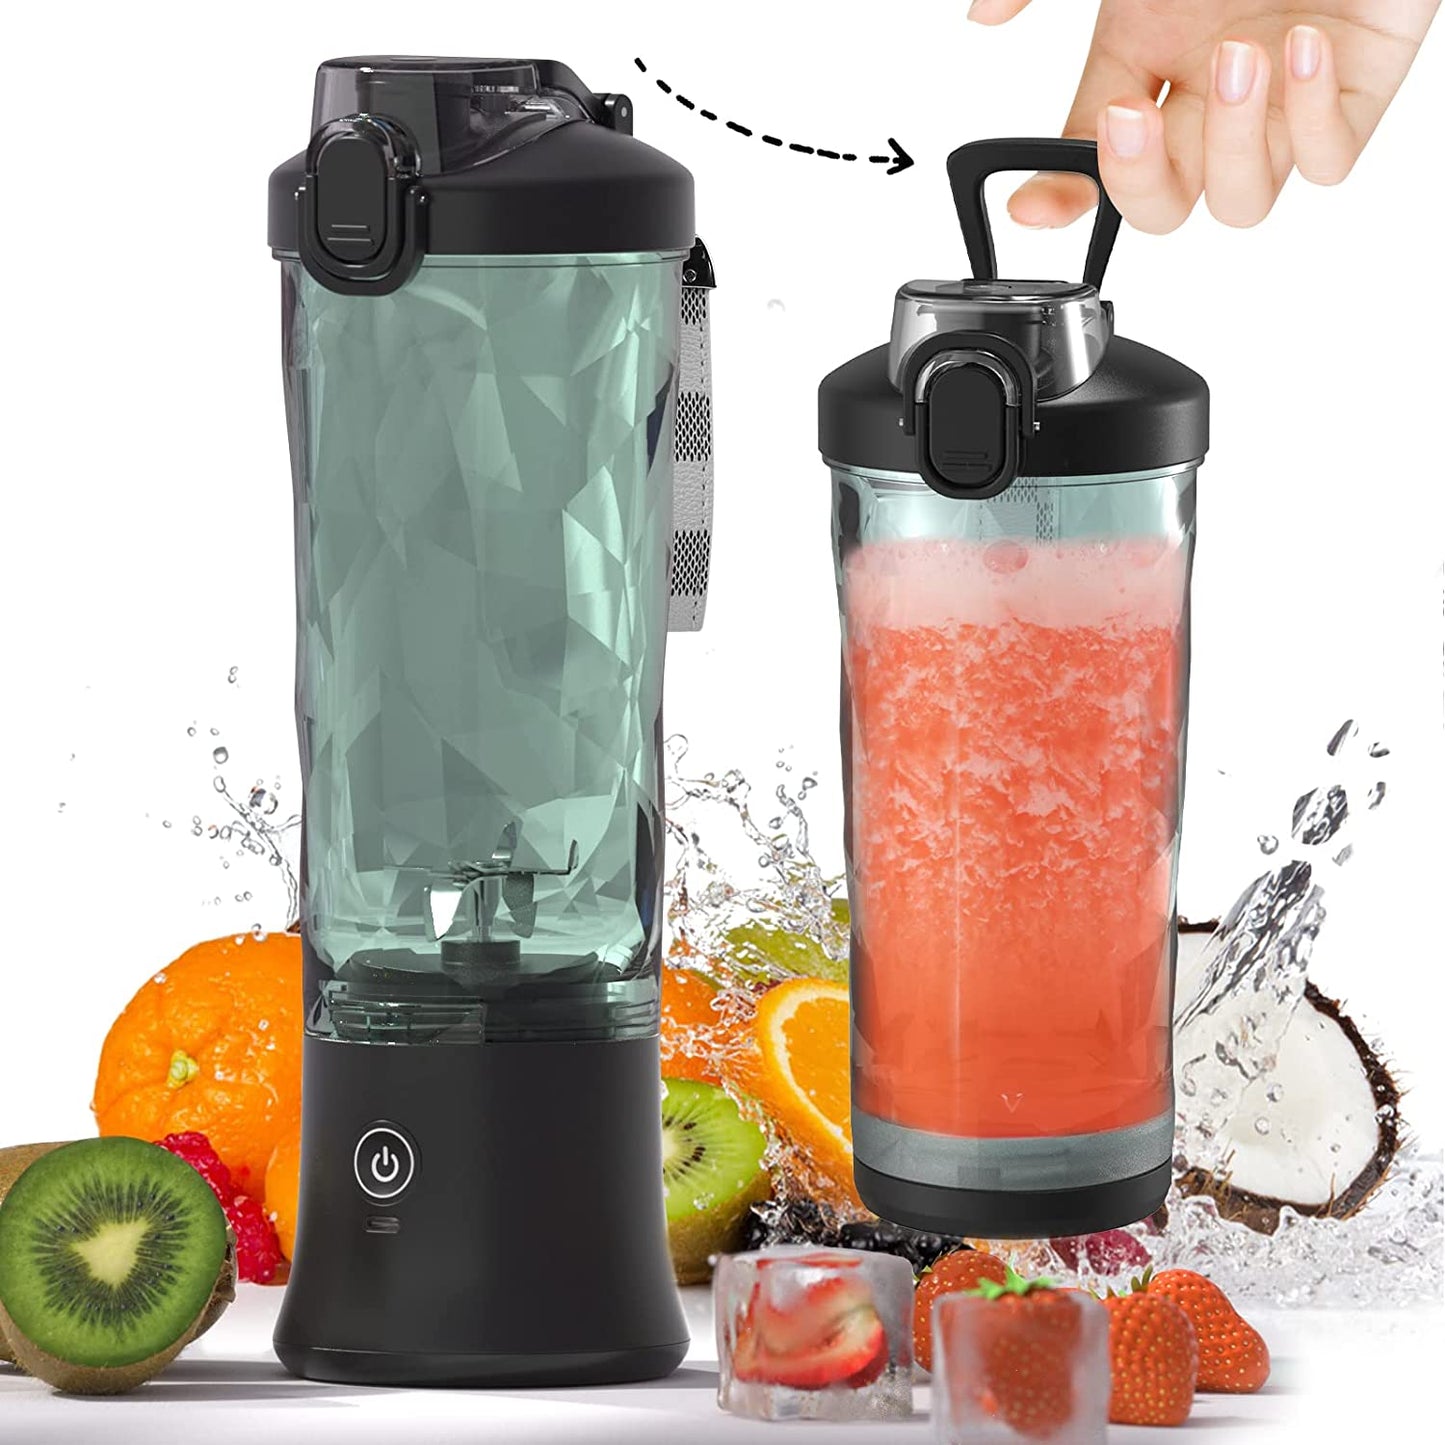 VitaFusion - The handheld blender for delicious smoothies and shakes